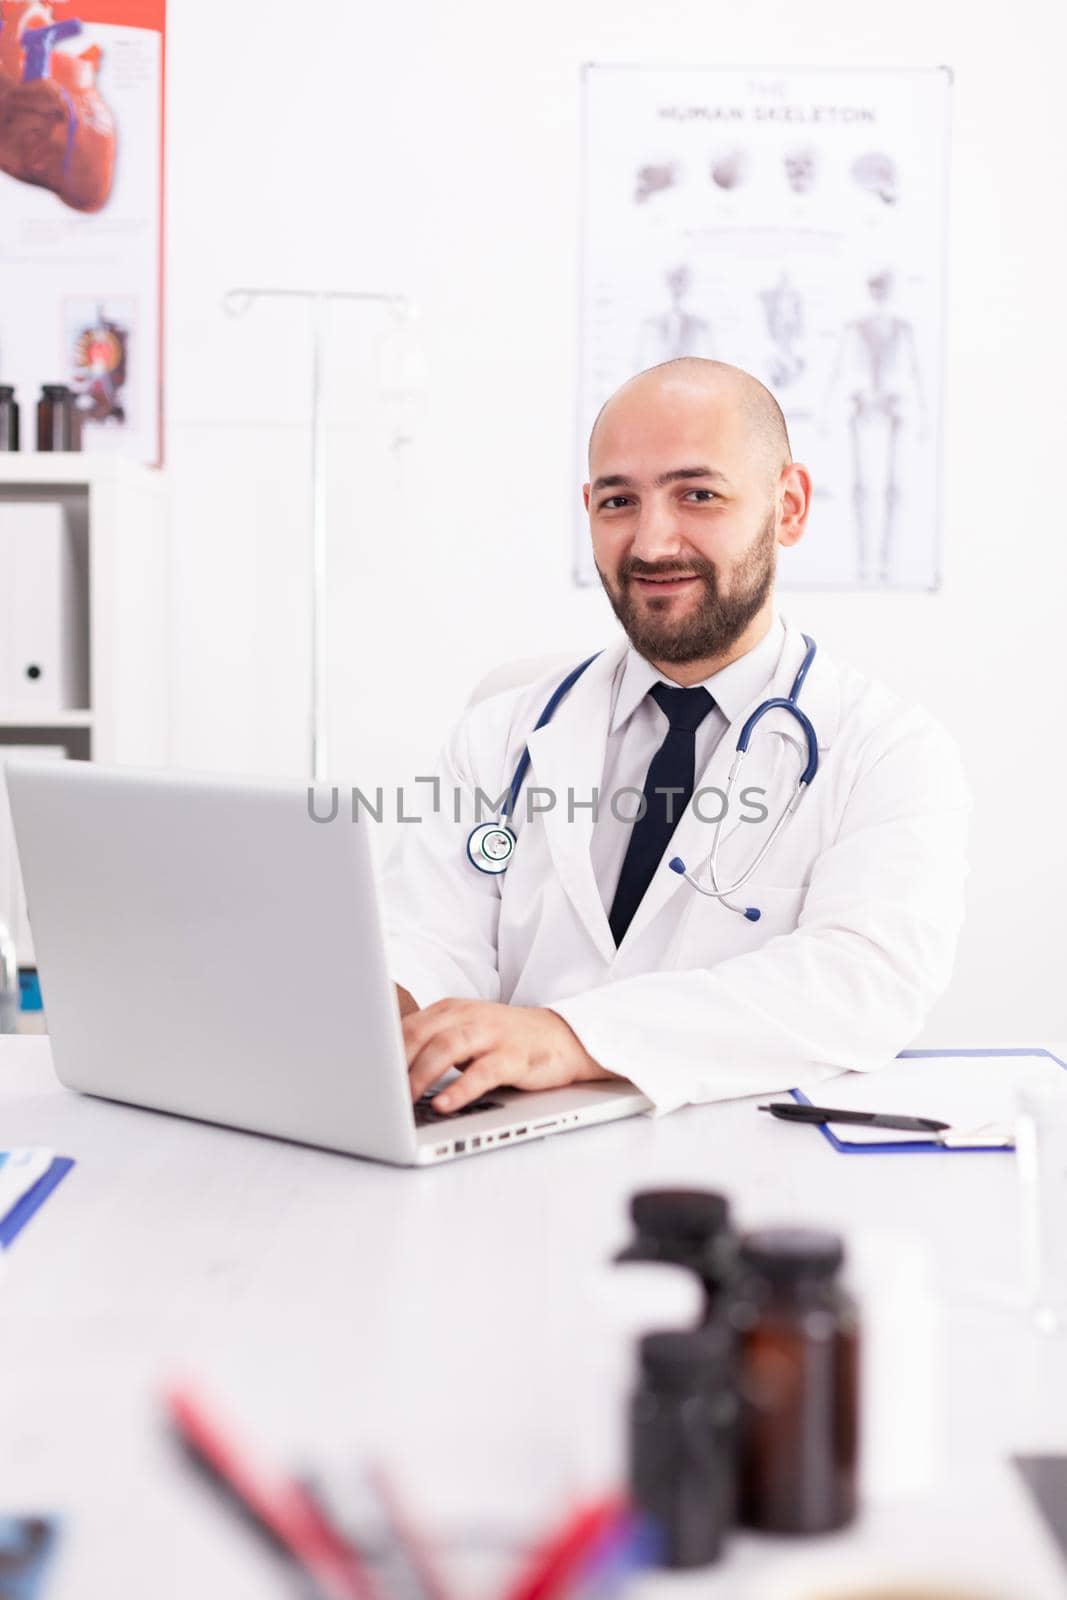 Portrait of doctor smiling holding hands on laptop keyboard looking at camera in hospital office wearing lab coat. Medical practitioner using notebook in clinic workplace, expertise, medicine.